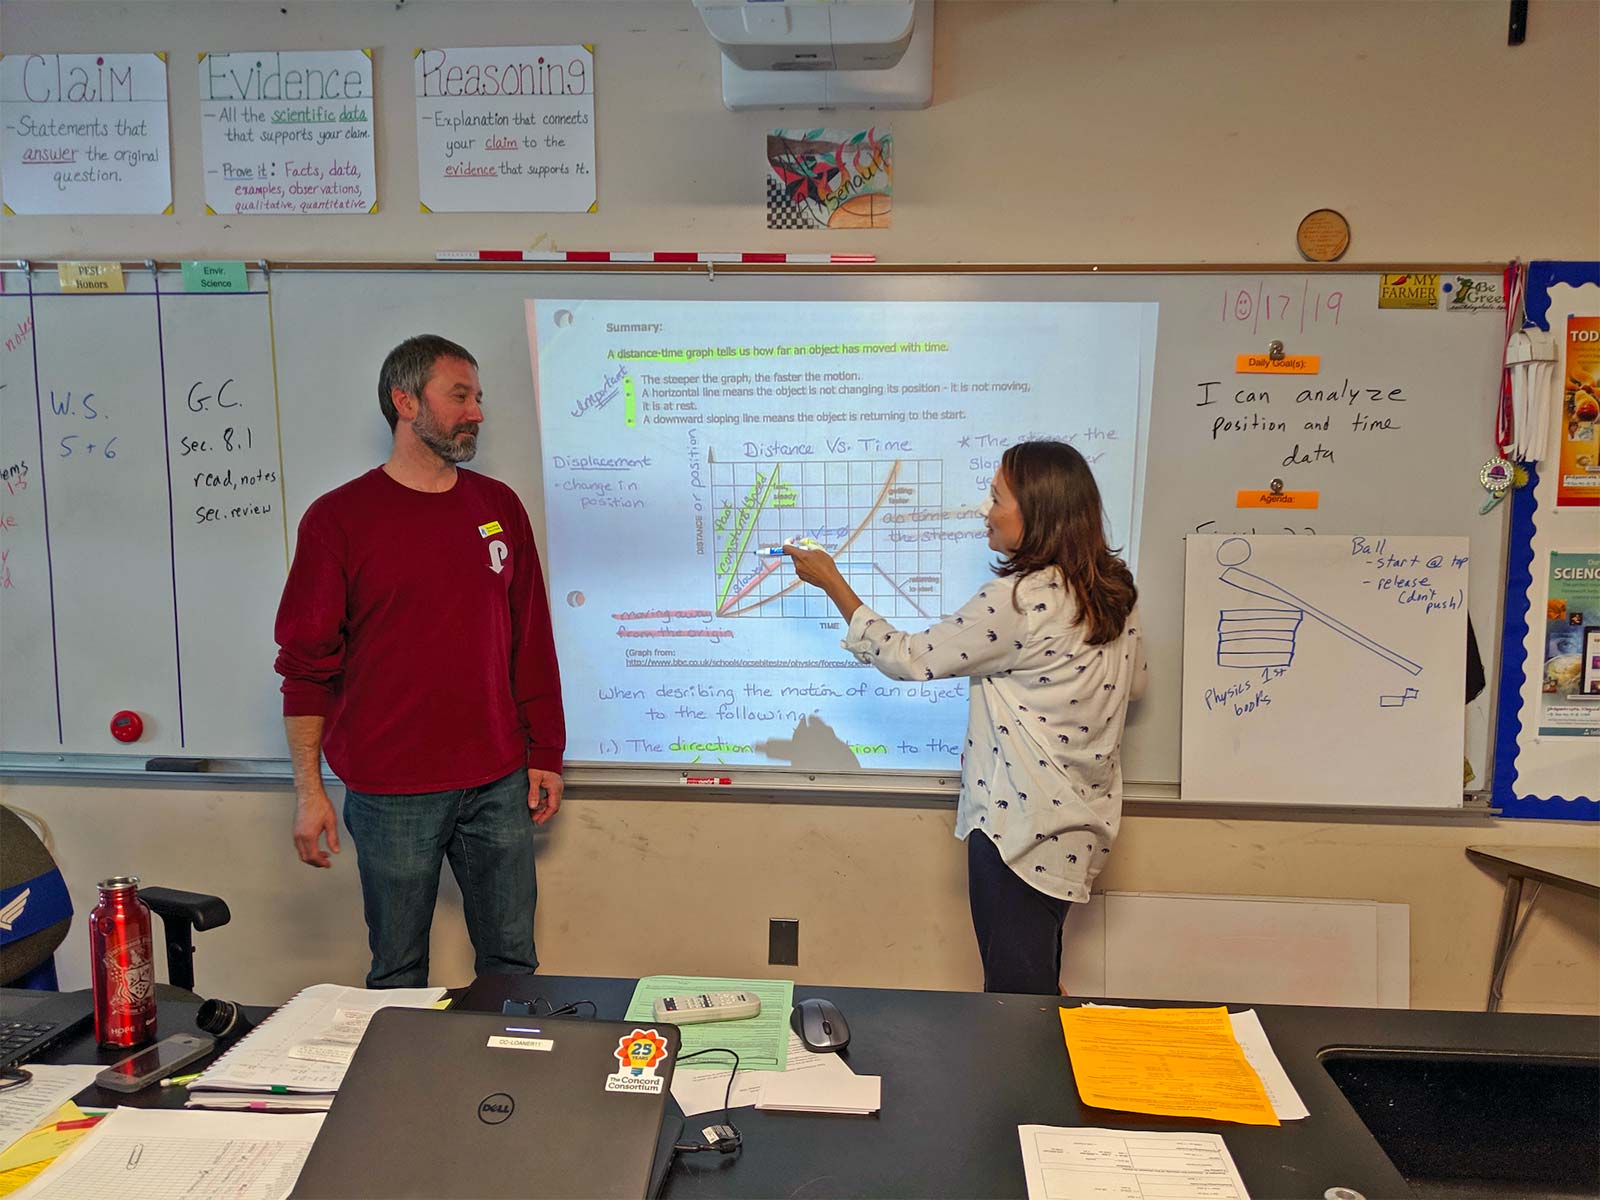 Co-teachers Michelle Murtha and JP Arsenault collaboratively teaching inclusive ninth grade physics